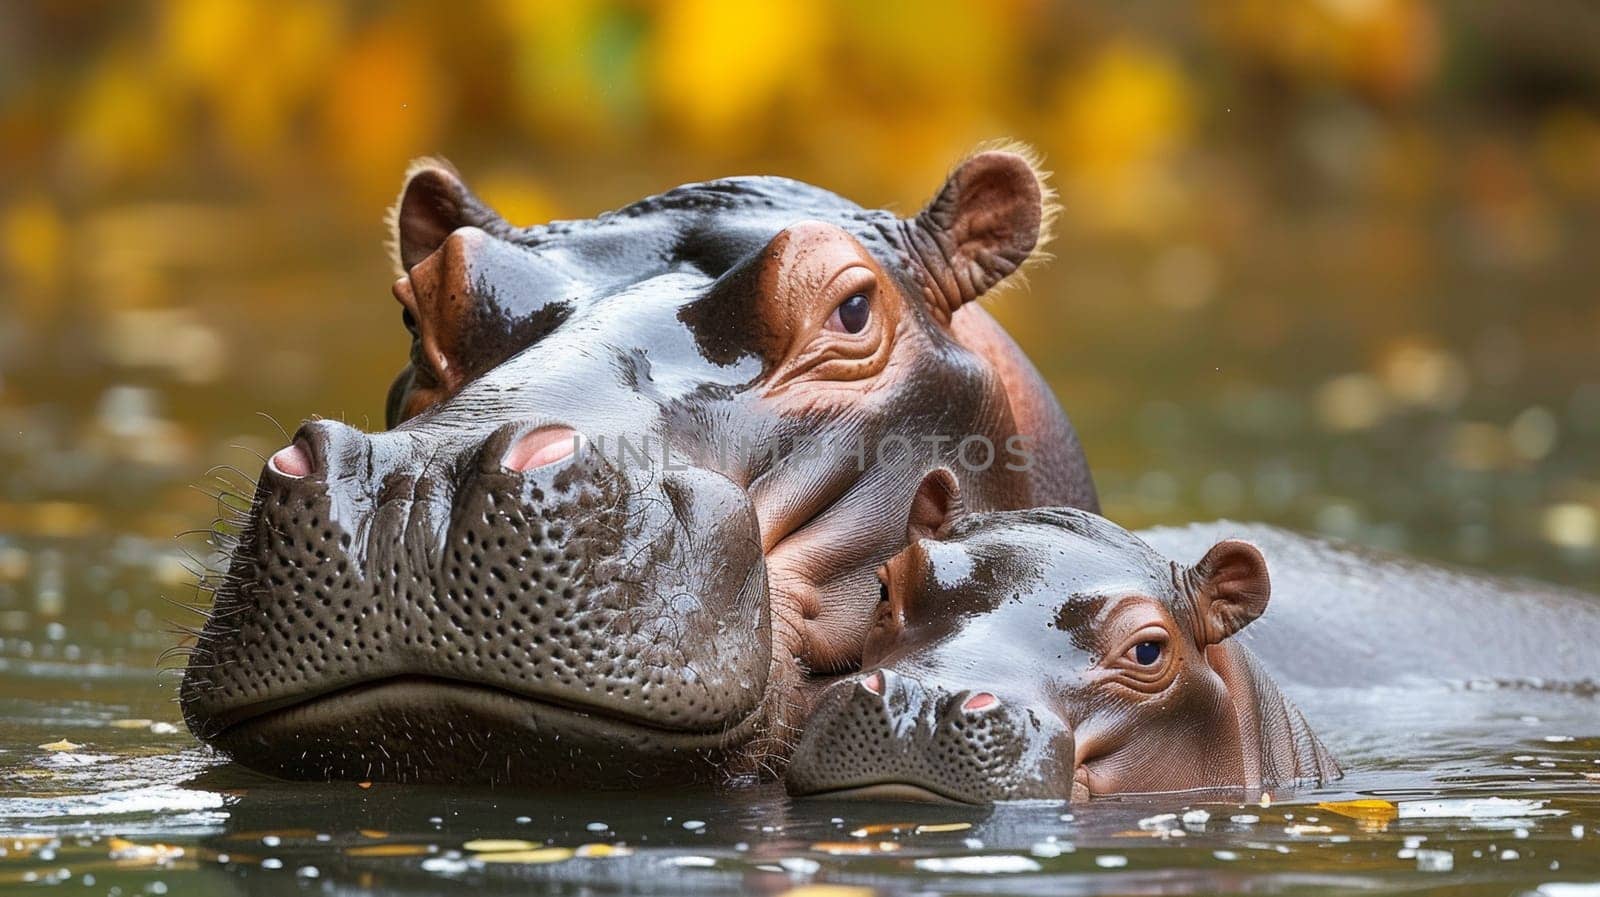 A hippo and baby in the water with leaves on them